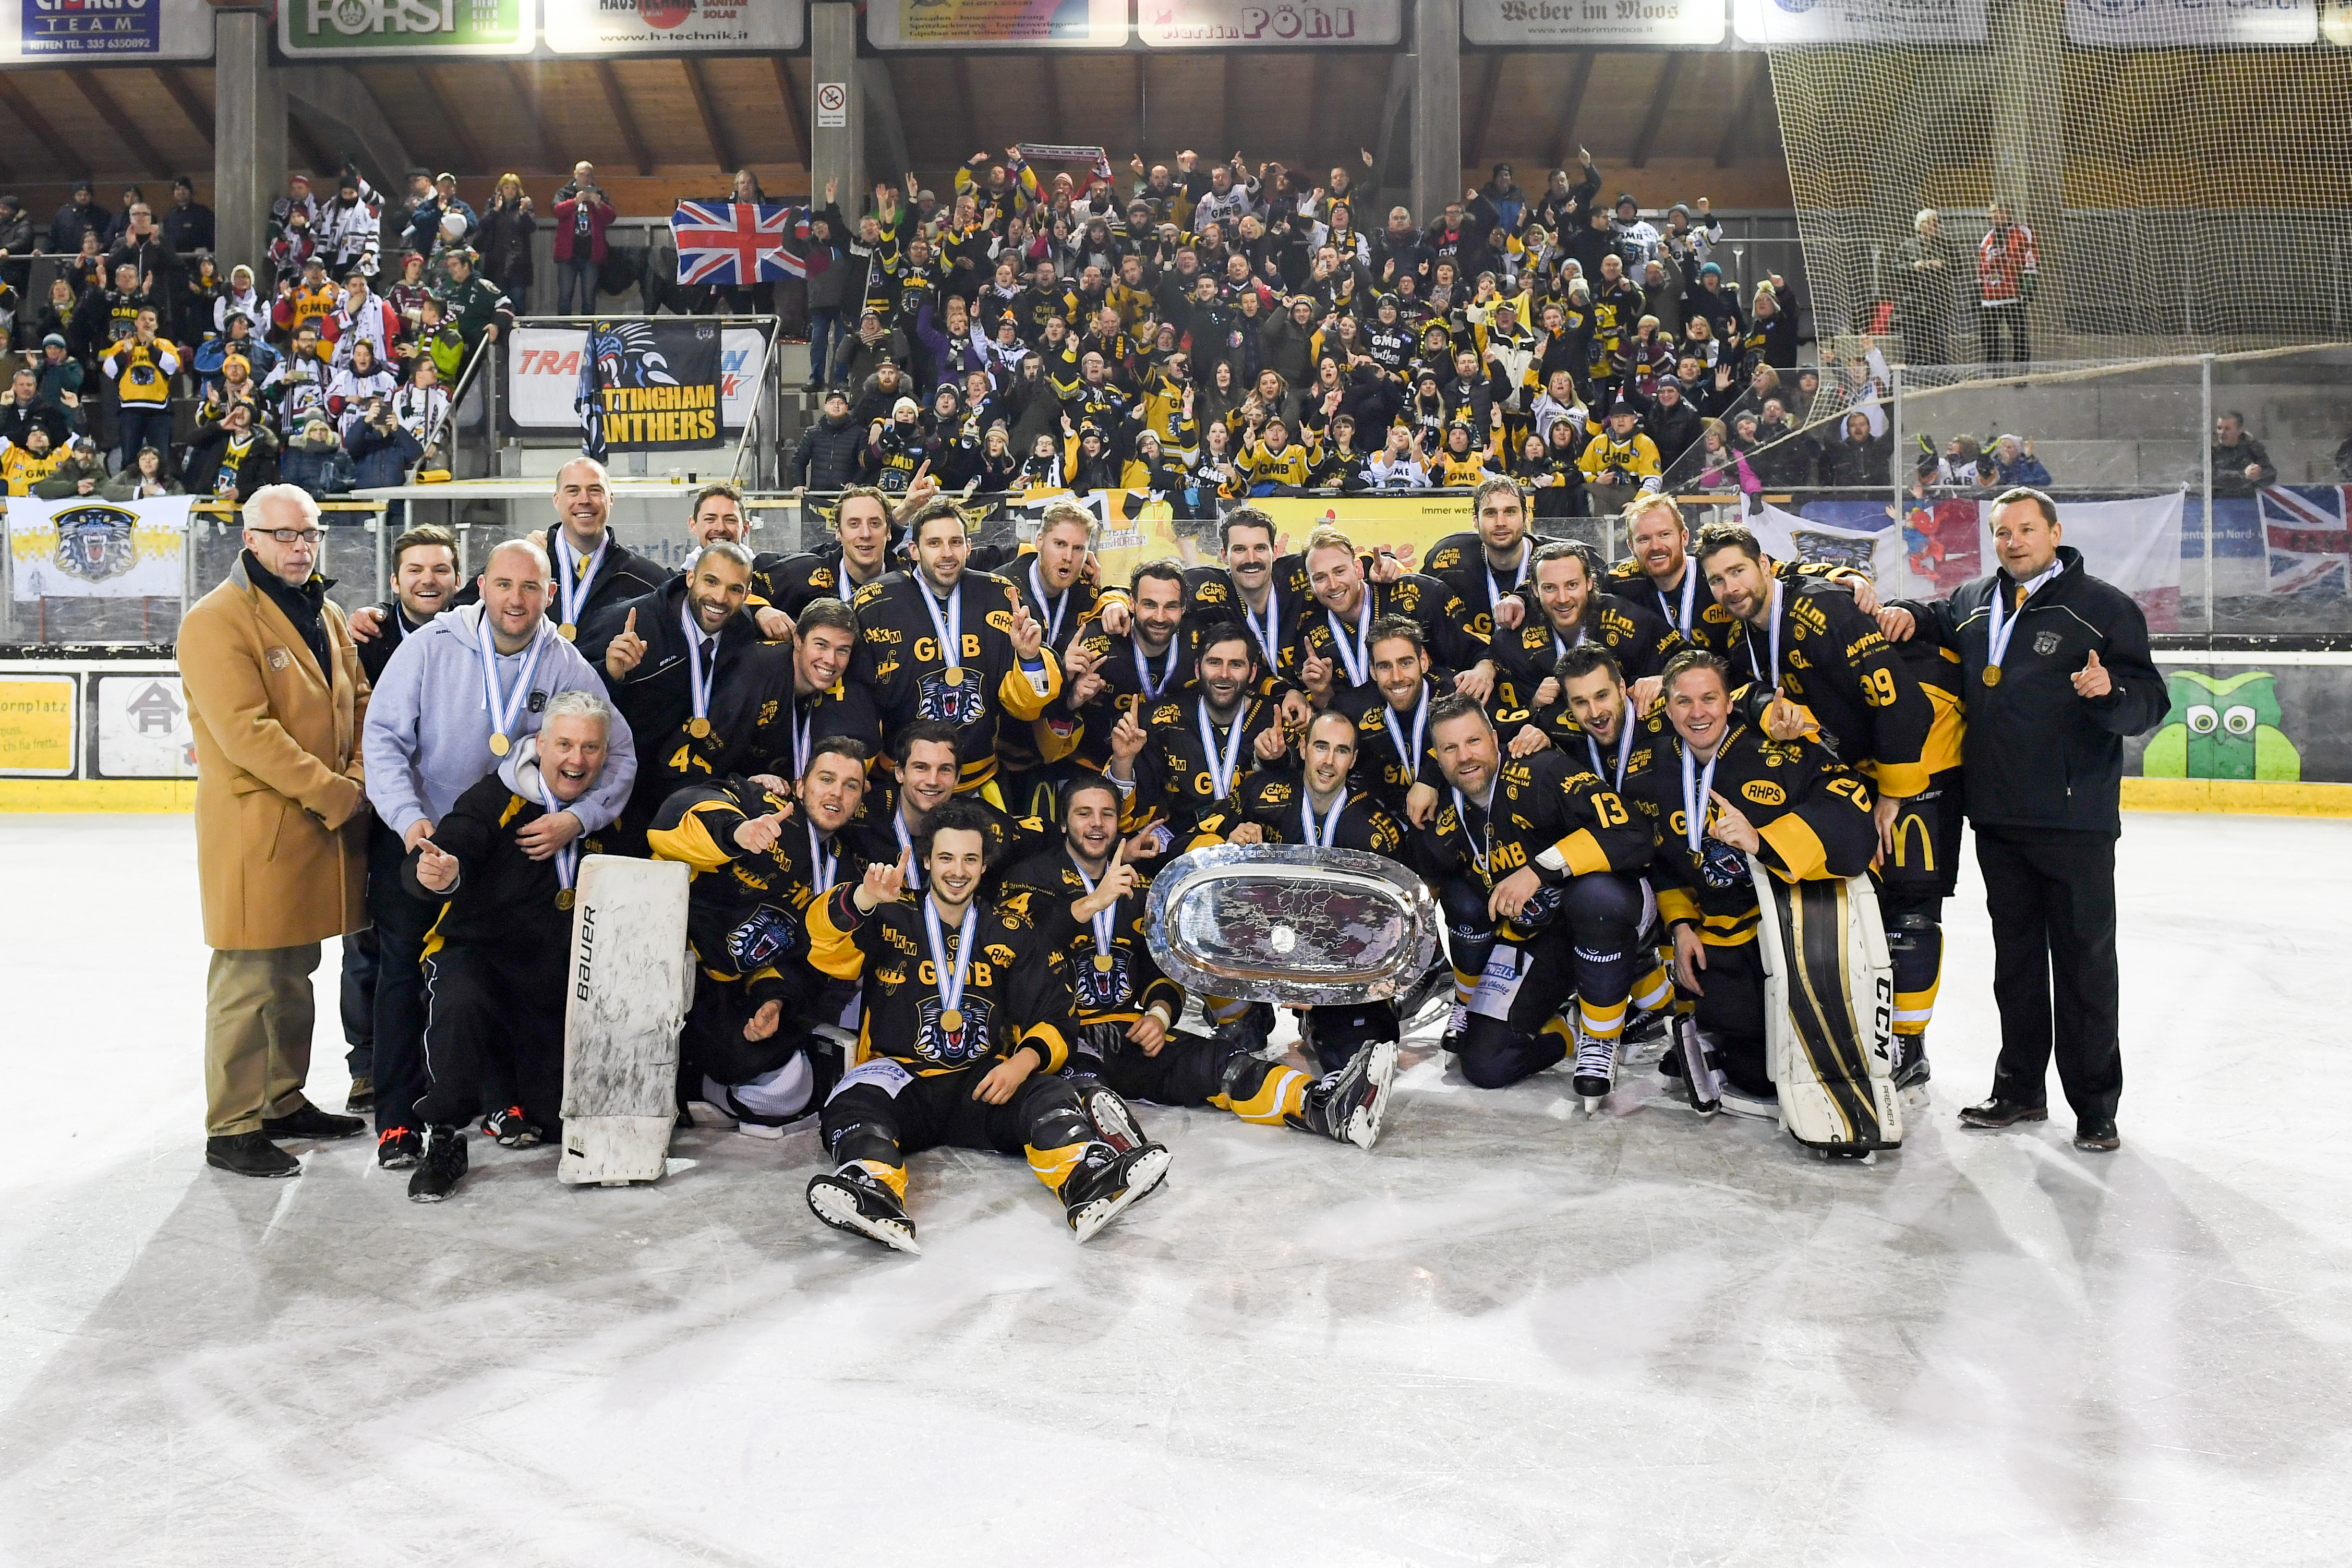 PODCAST ON BELFAST AND 2017 CONTINENTAL CUP SUCCESS Top Image